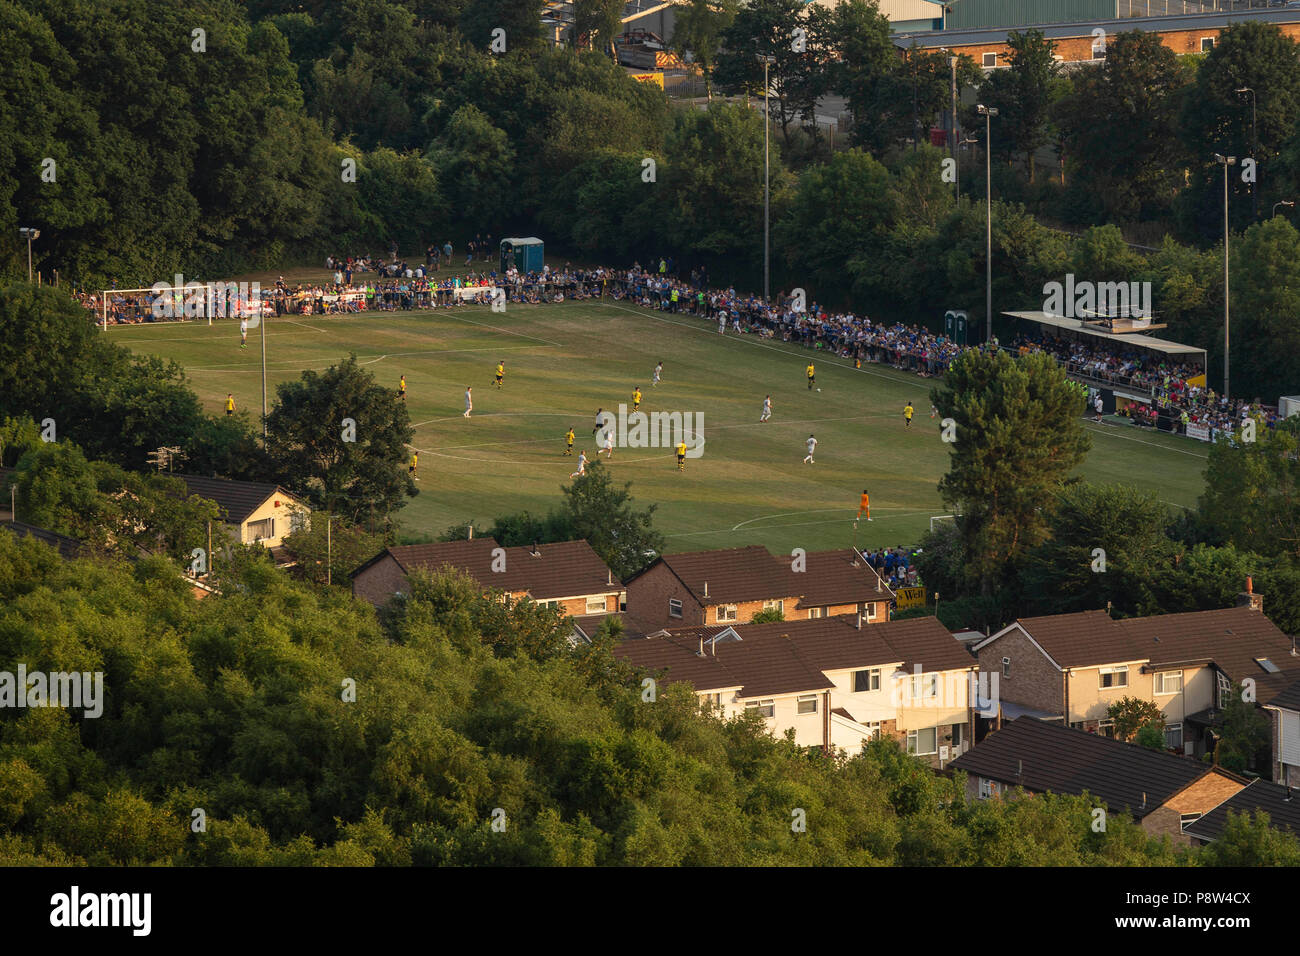 Taff's Well, Wales, UK. 13th July 2018. General overview during the pre-season friendly match between Taff's Well FC of Welsh League Division One and Cardiff City of the Premier League at the Rhiw'r Ddar stadium, Taff's Well, Wales, UK. Credit: Mark Hawkins/Alamy Live News Stock Photo